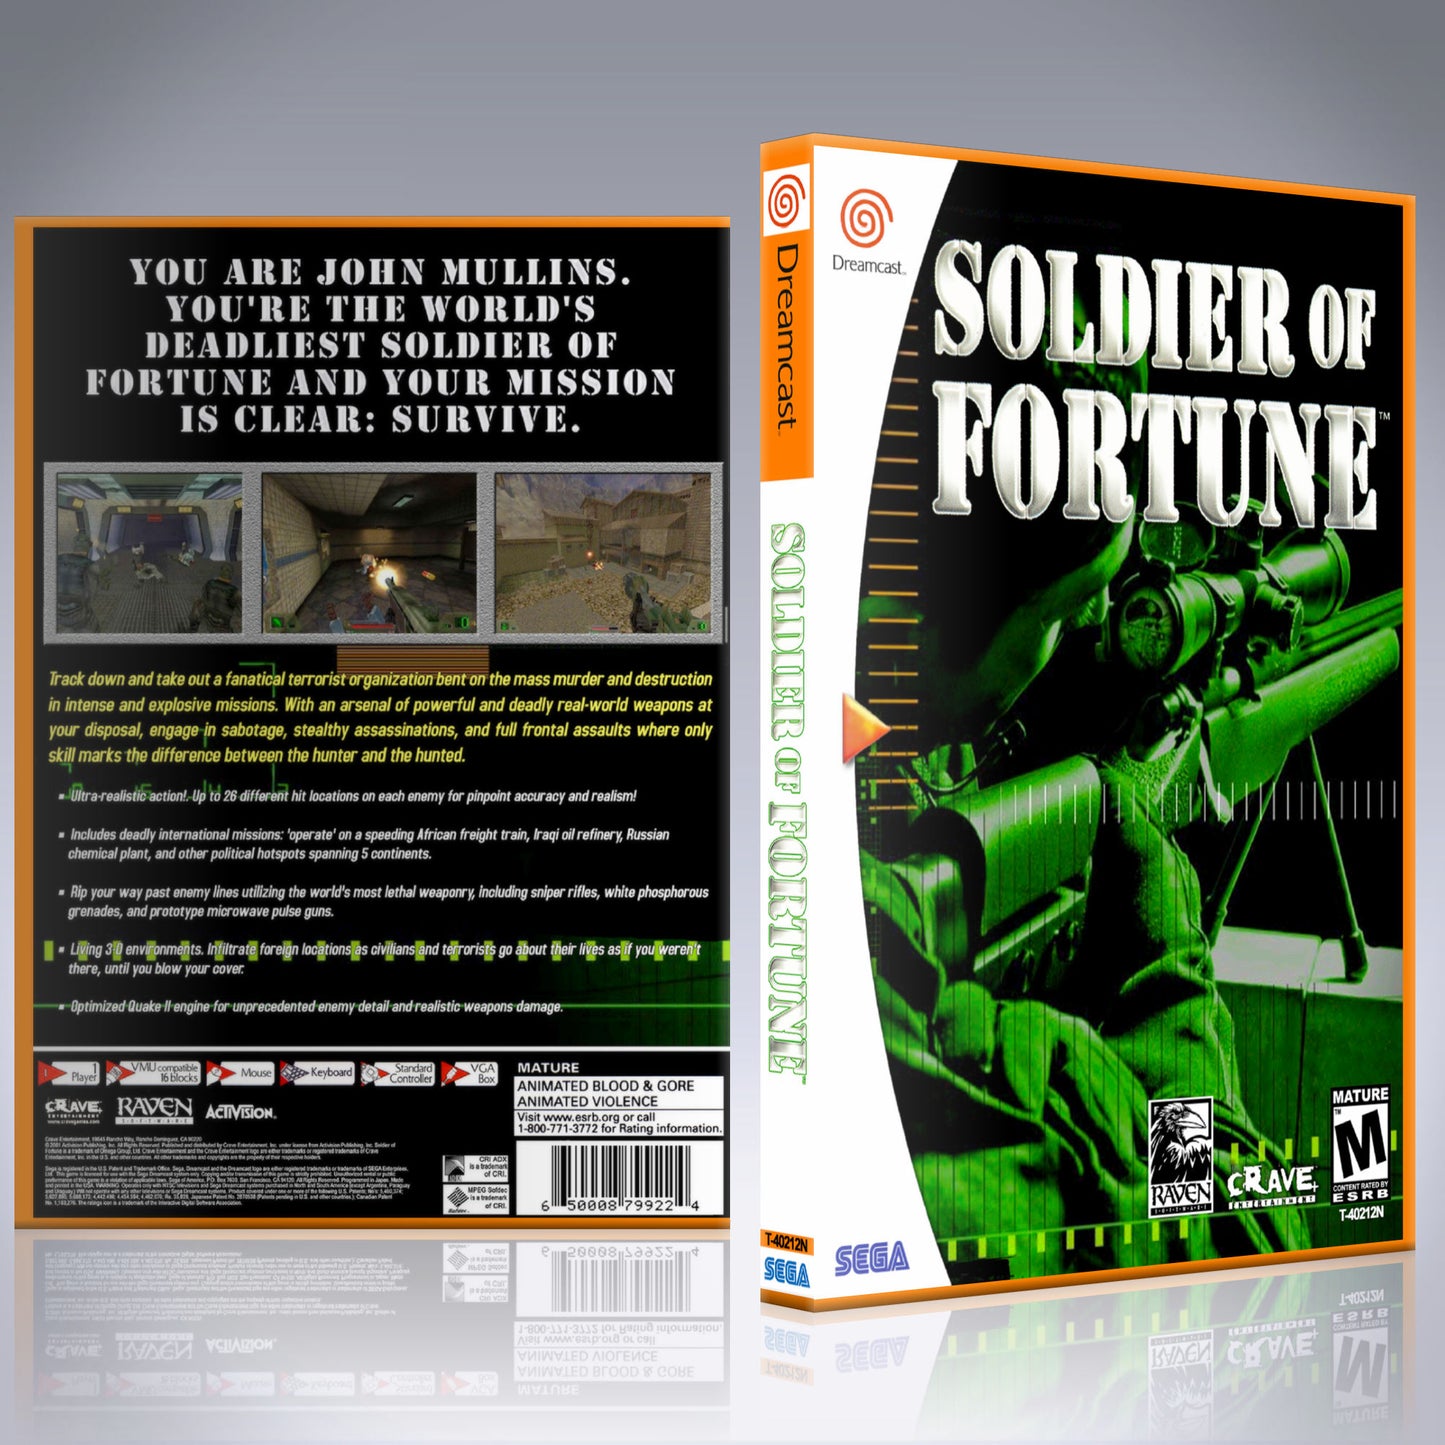 Dreamcast Custom Case - NO GAME - Soldier of Fortune